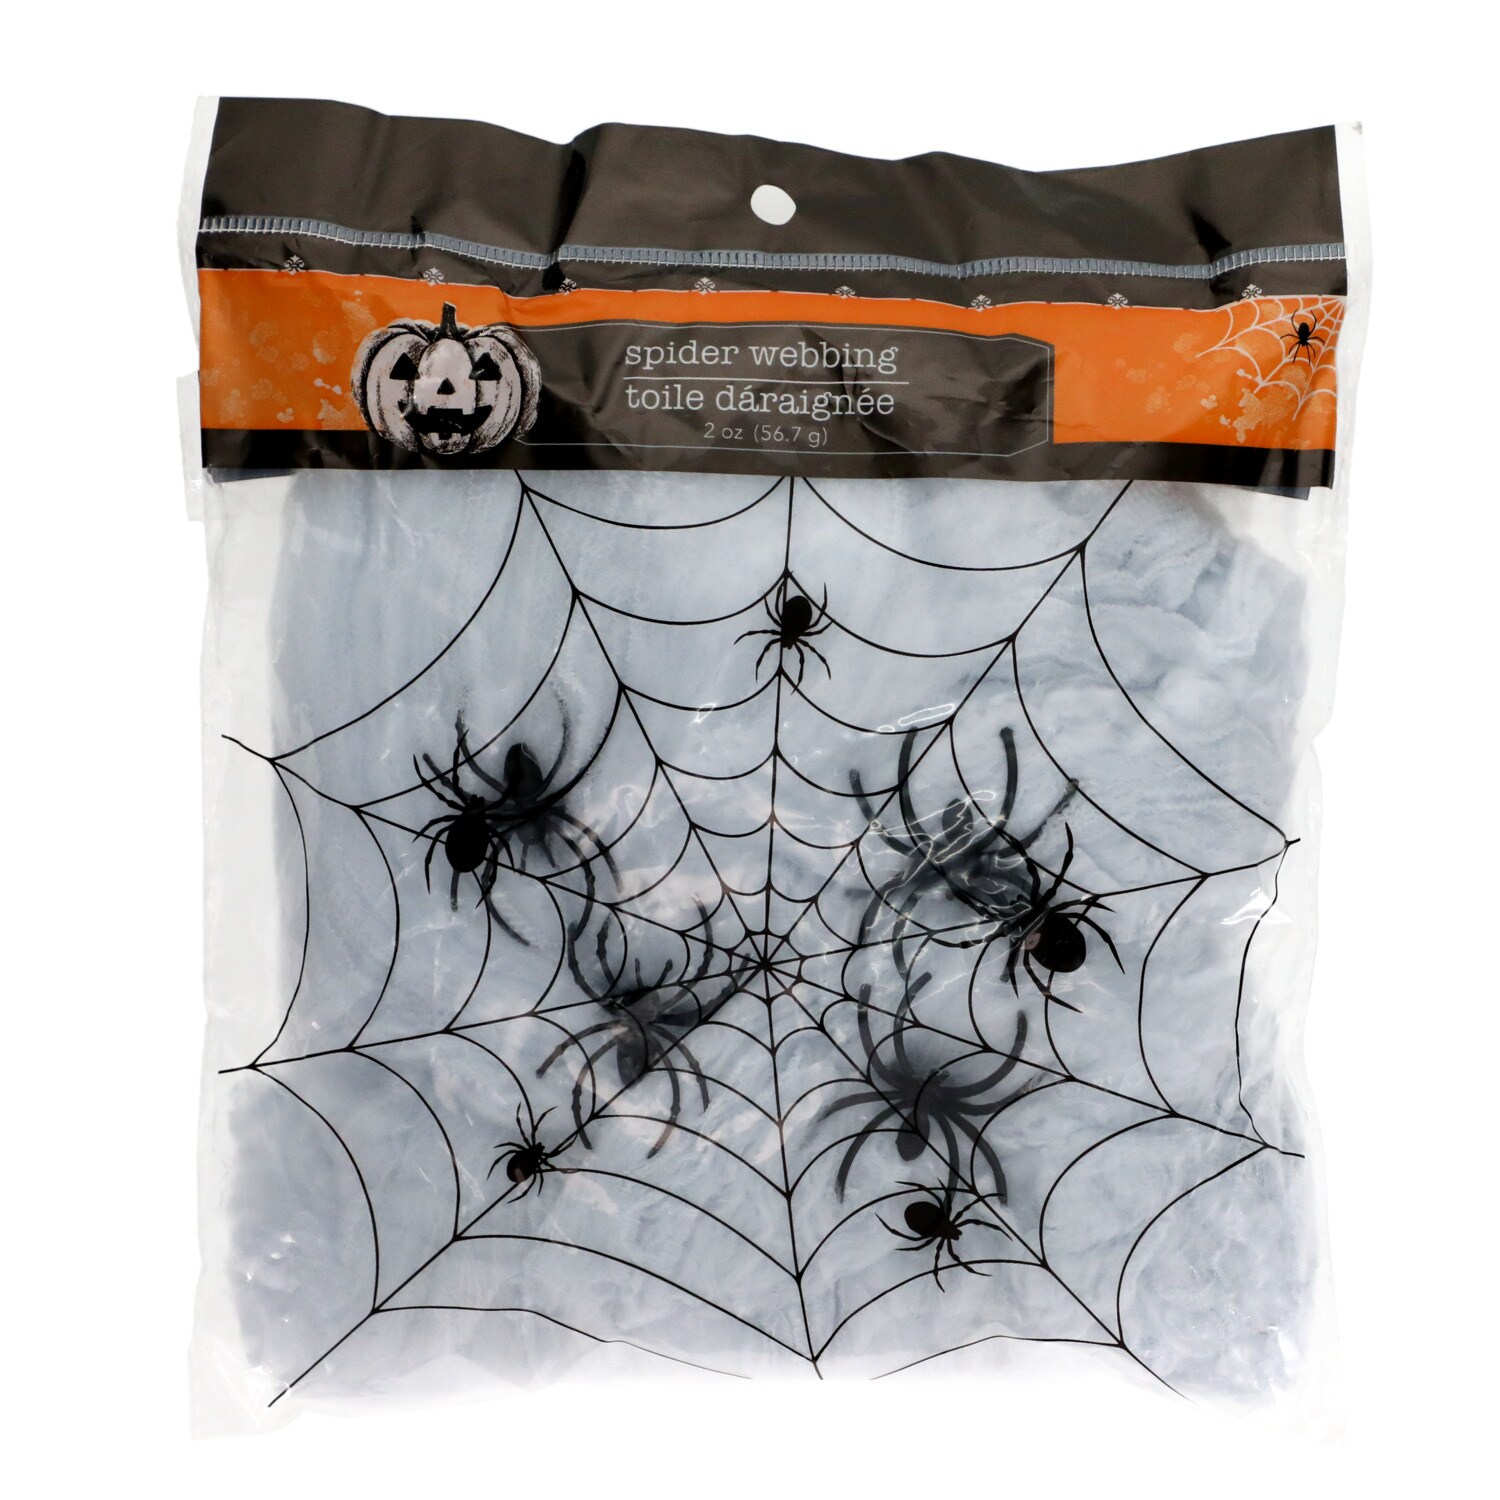 Spider webbing 2oz with 4 Spiders 